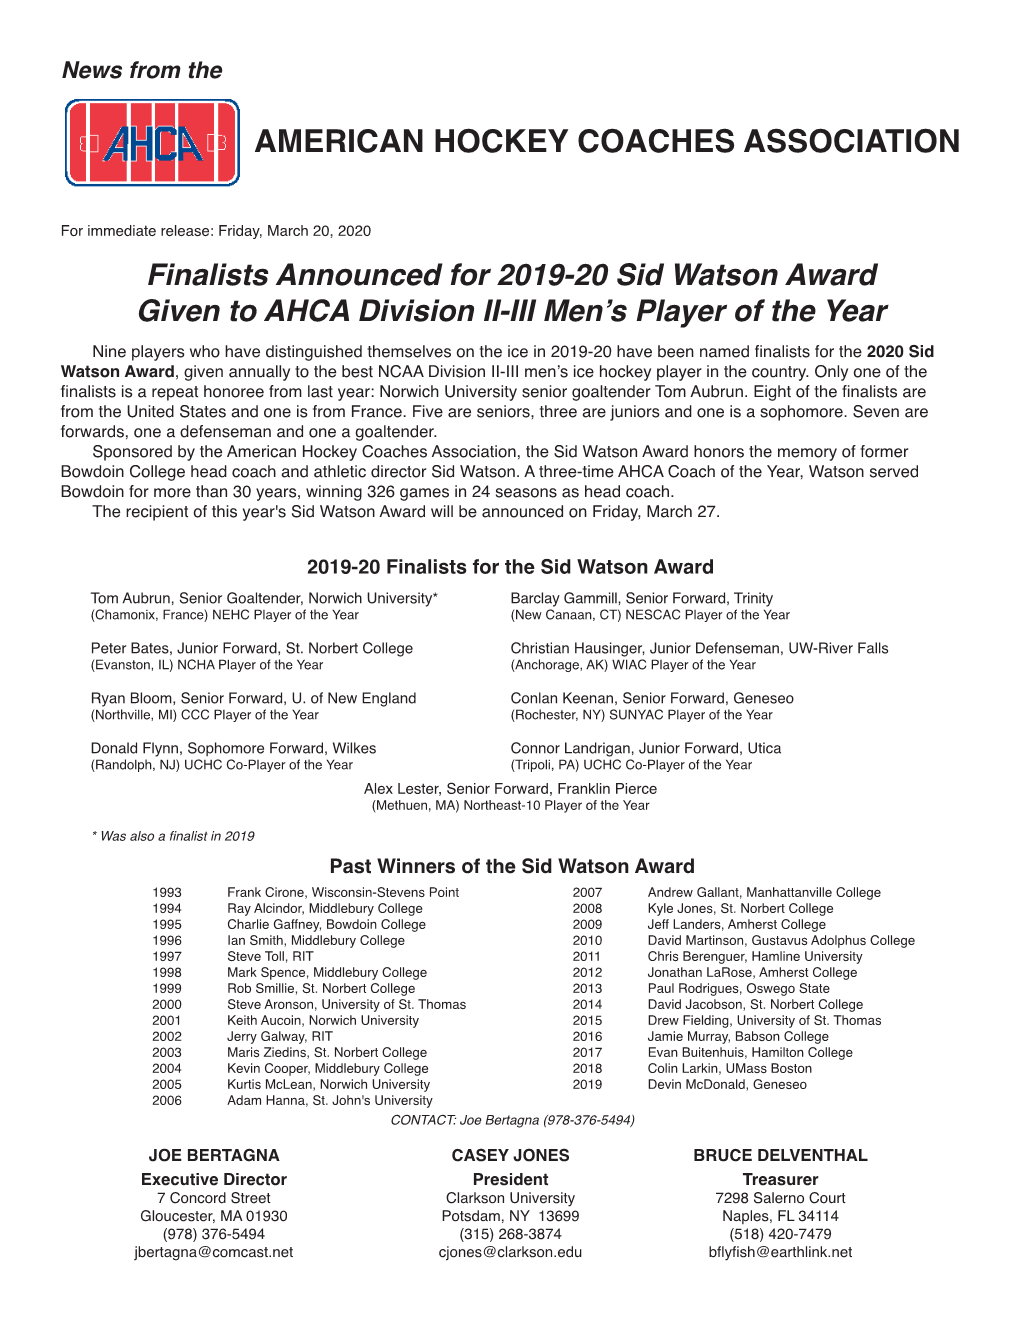 Finalists Announced for 2019-20 Sid Watson Award Given to AHCA